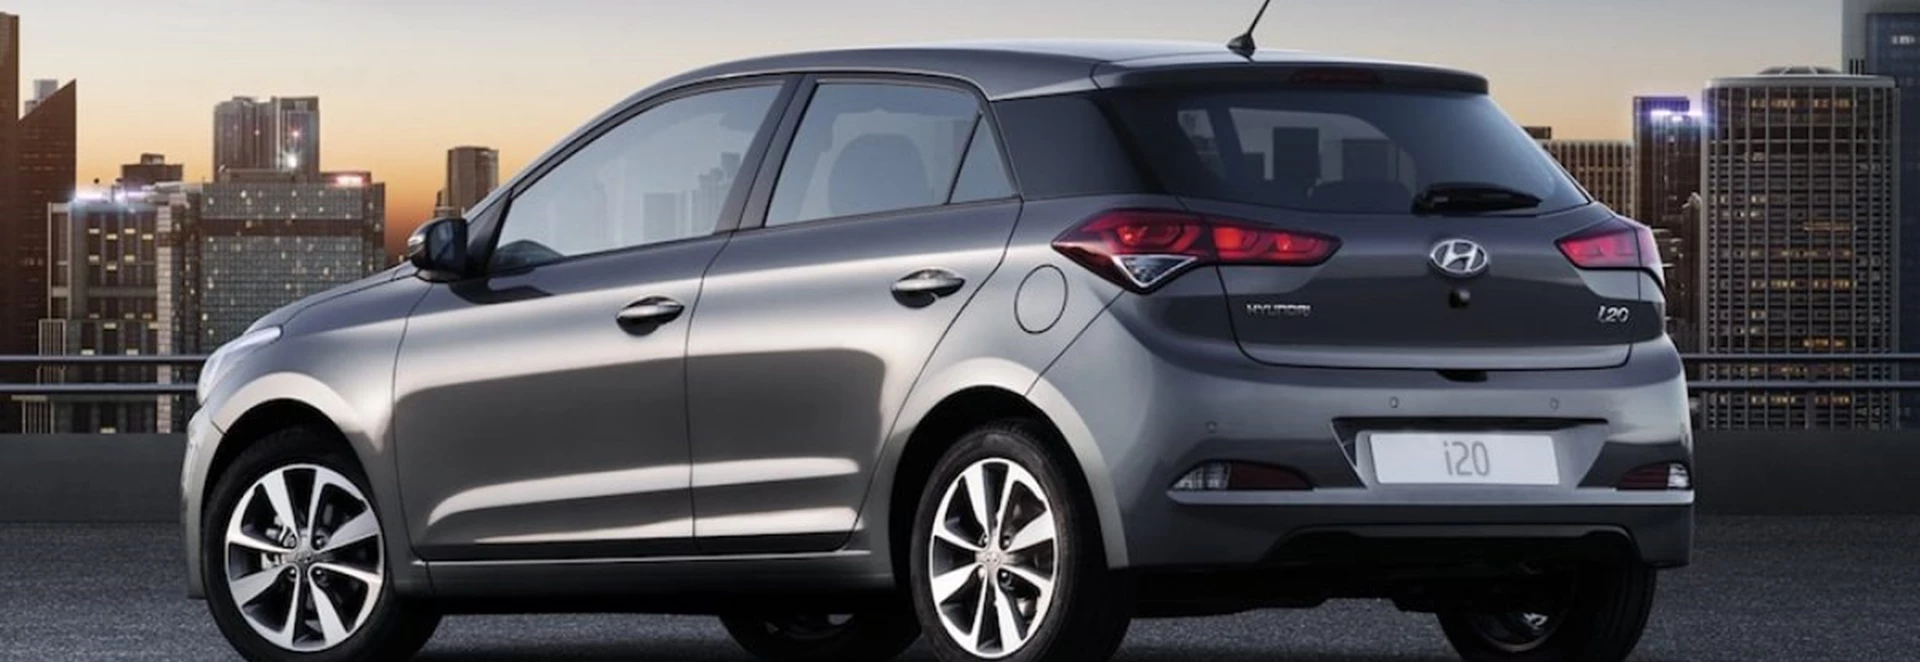 New Hyundai i20 Turbo Edition offers more bang for less buck